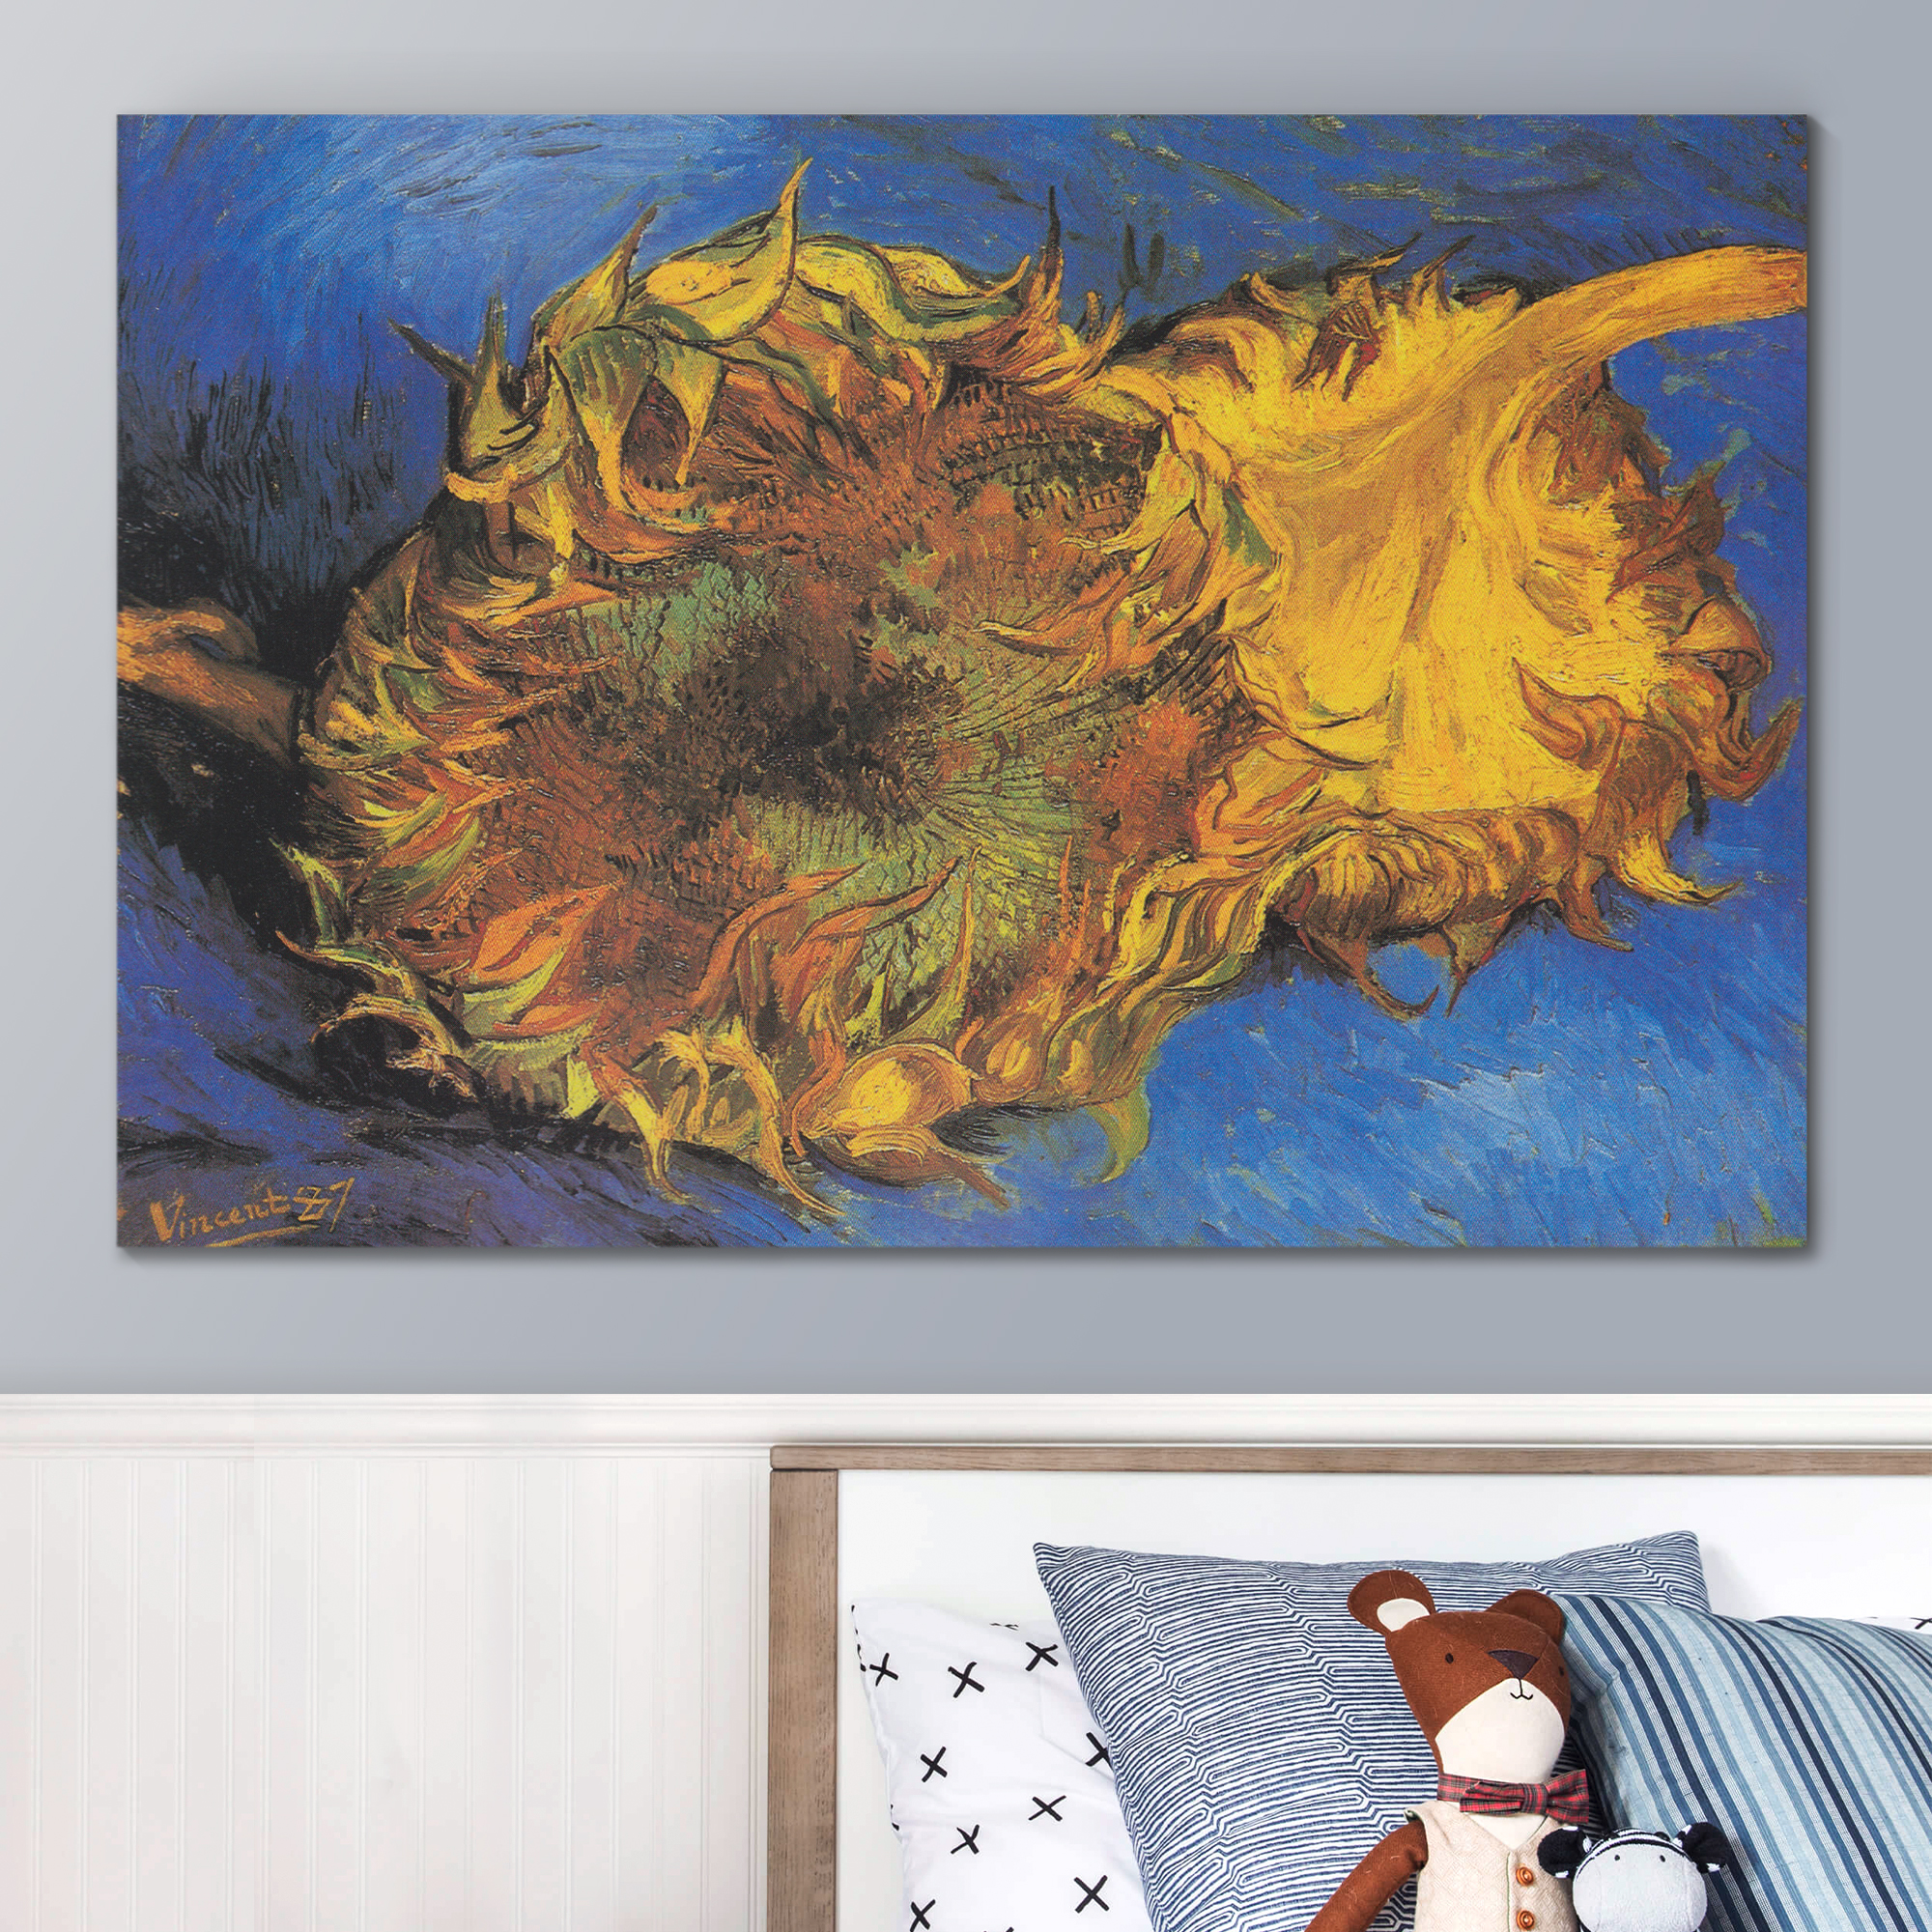 Two Cut Sunflowers, 1887 by Vincent Van Gogh - Canvas Print Wall Art Famous Painting Reproduction - 24